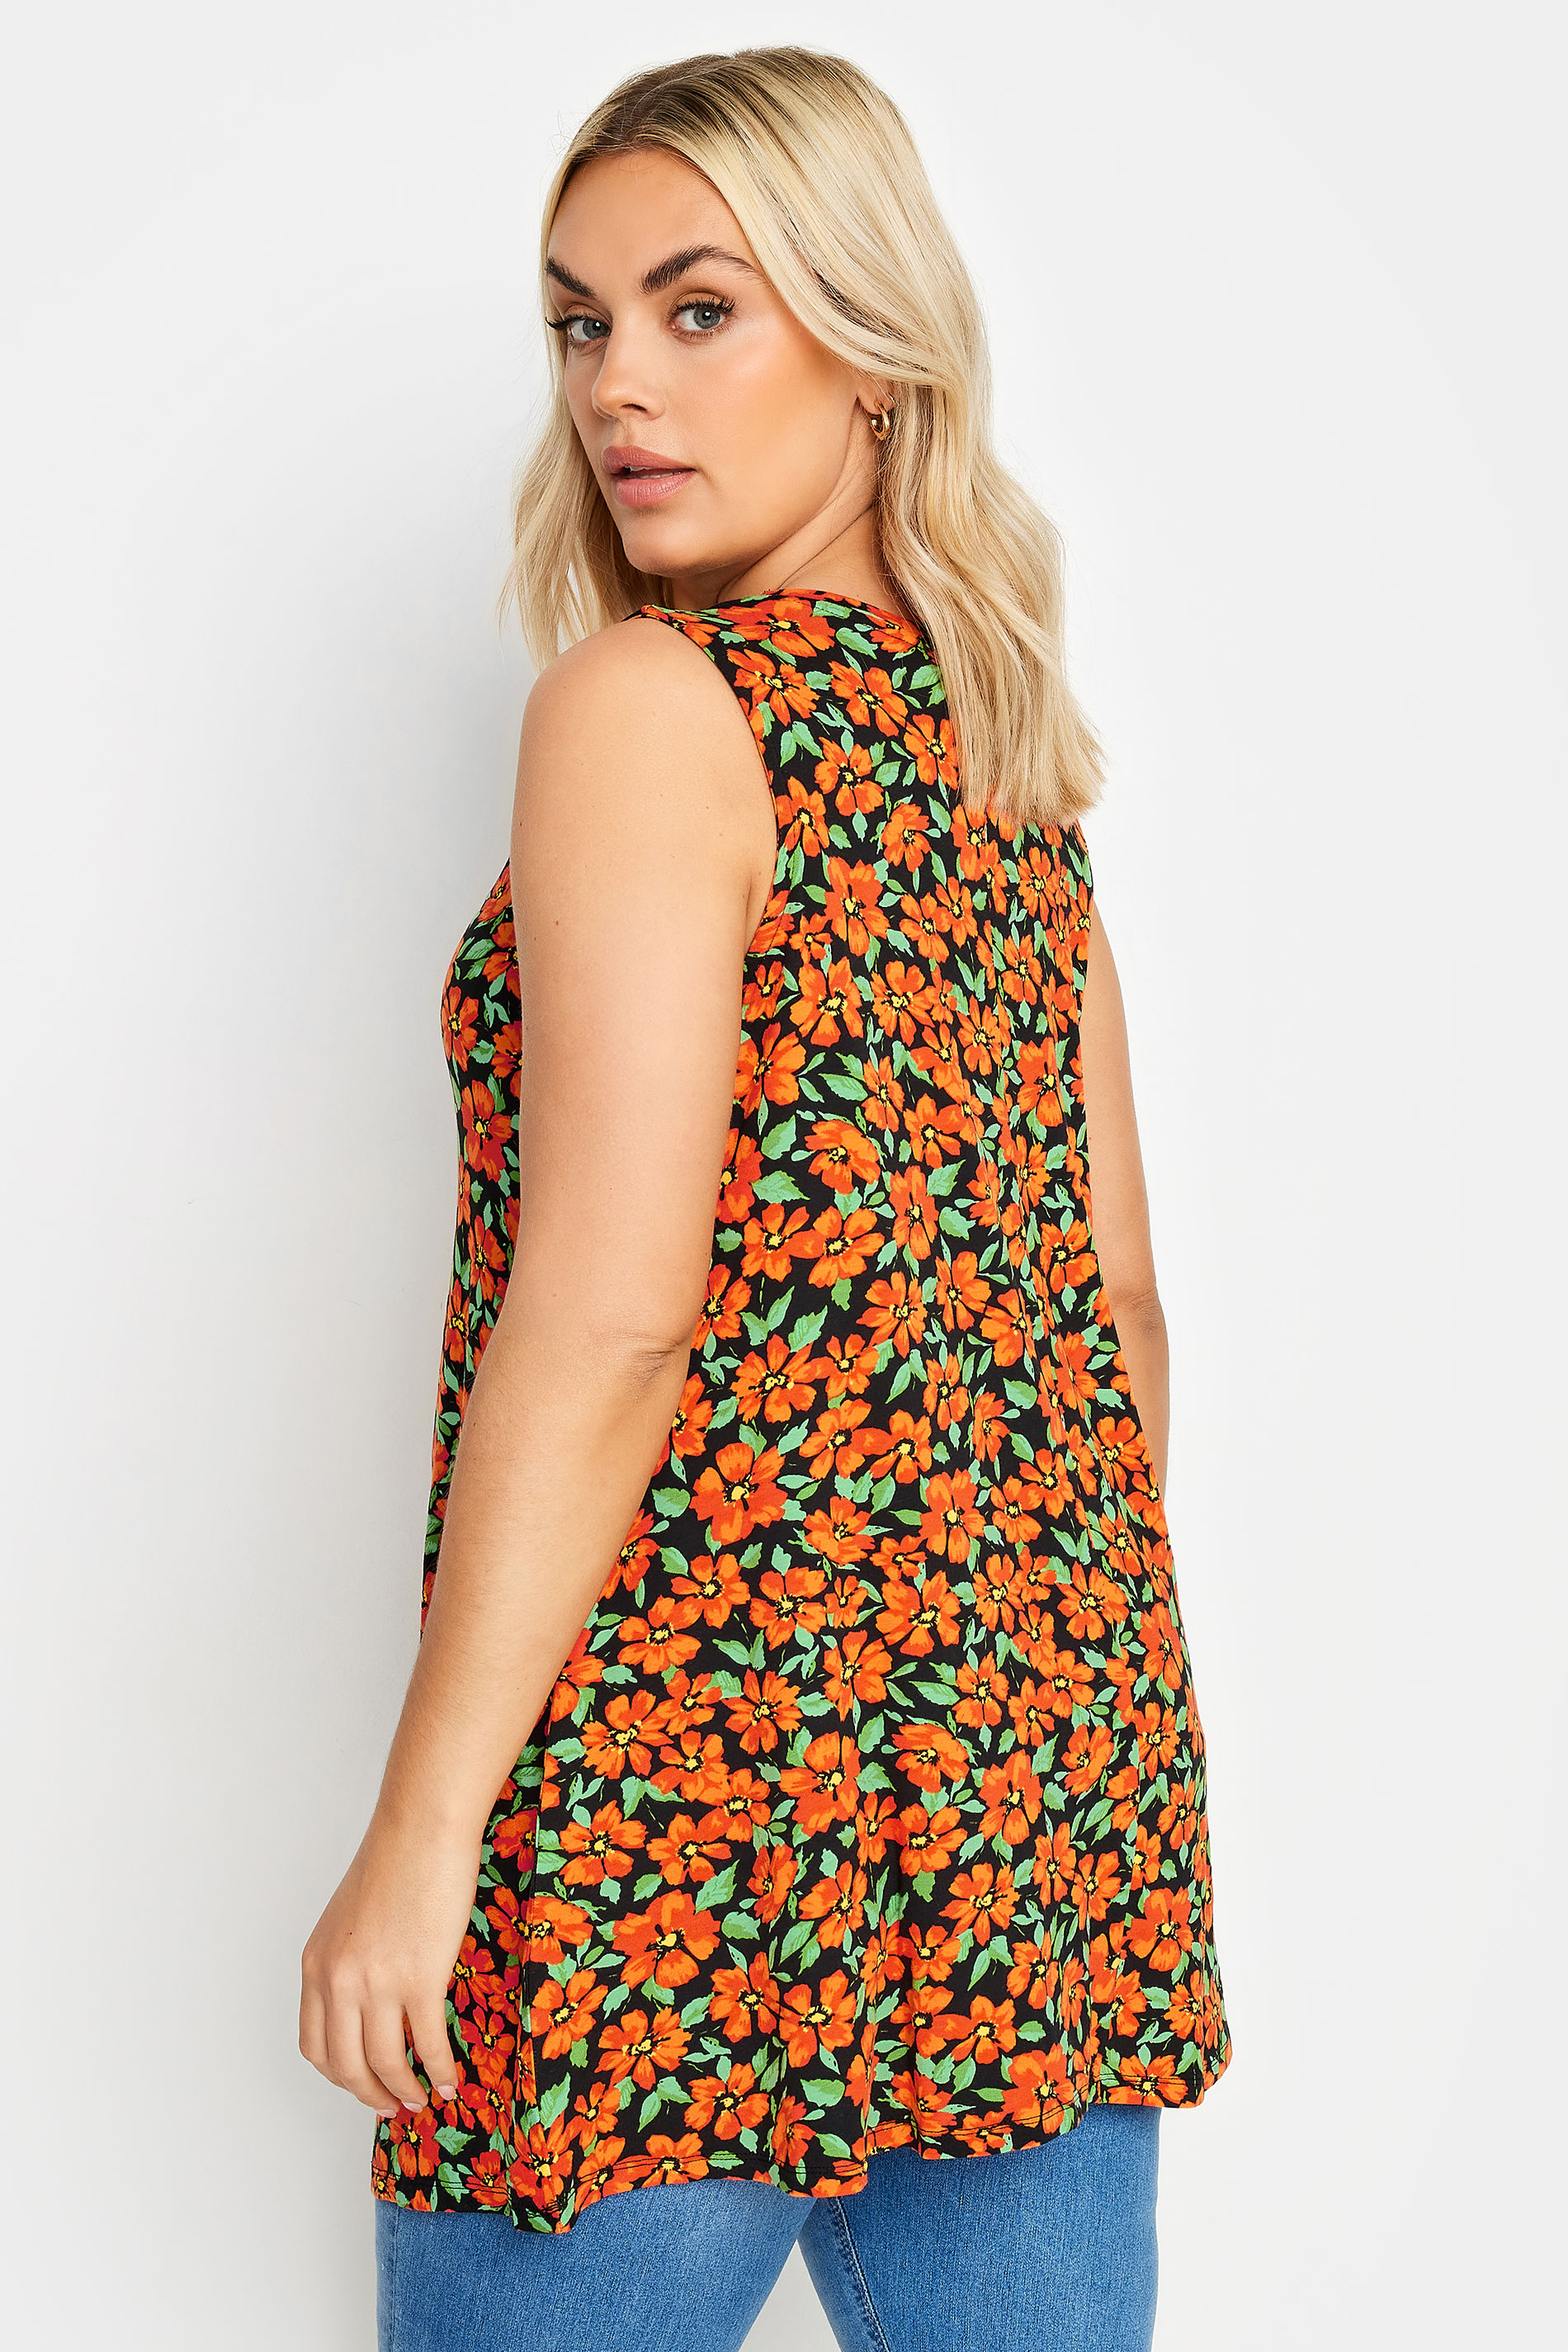 YOURS Plus Size Orange Floral Printed Vest Top | Yours Clothing 3